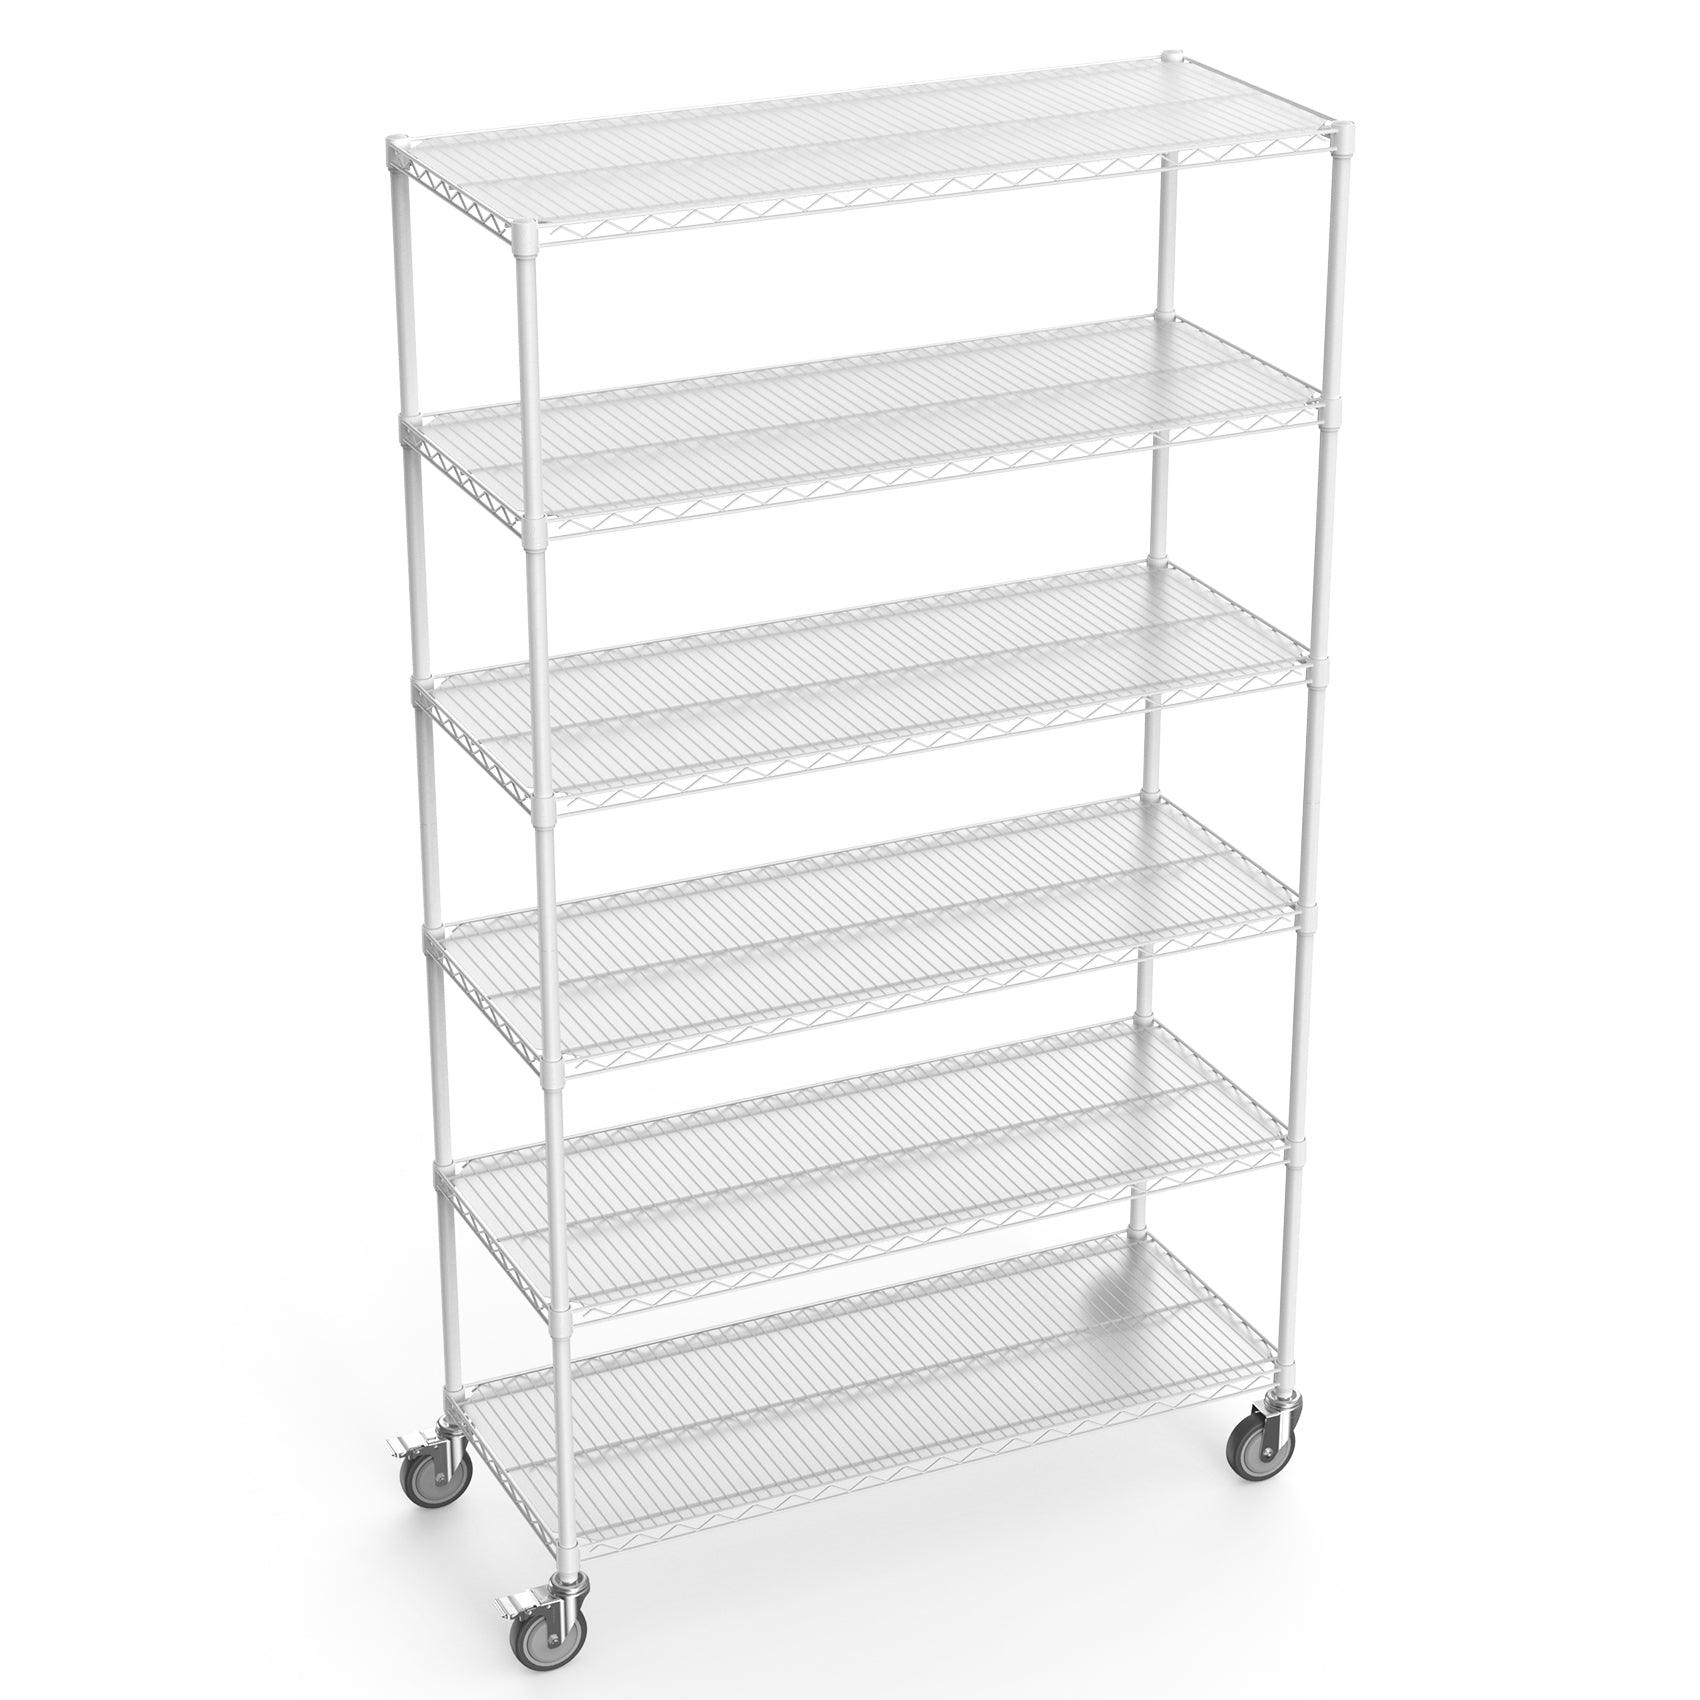 6 Tier Wire Shelving Unit, 6000 LBS NSF Height Adjustable Metal Garage Storage Shelves with Wheels, Heavy Duty Storage Wire Rack Metal Shelves - White - 204882 LamCham